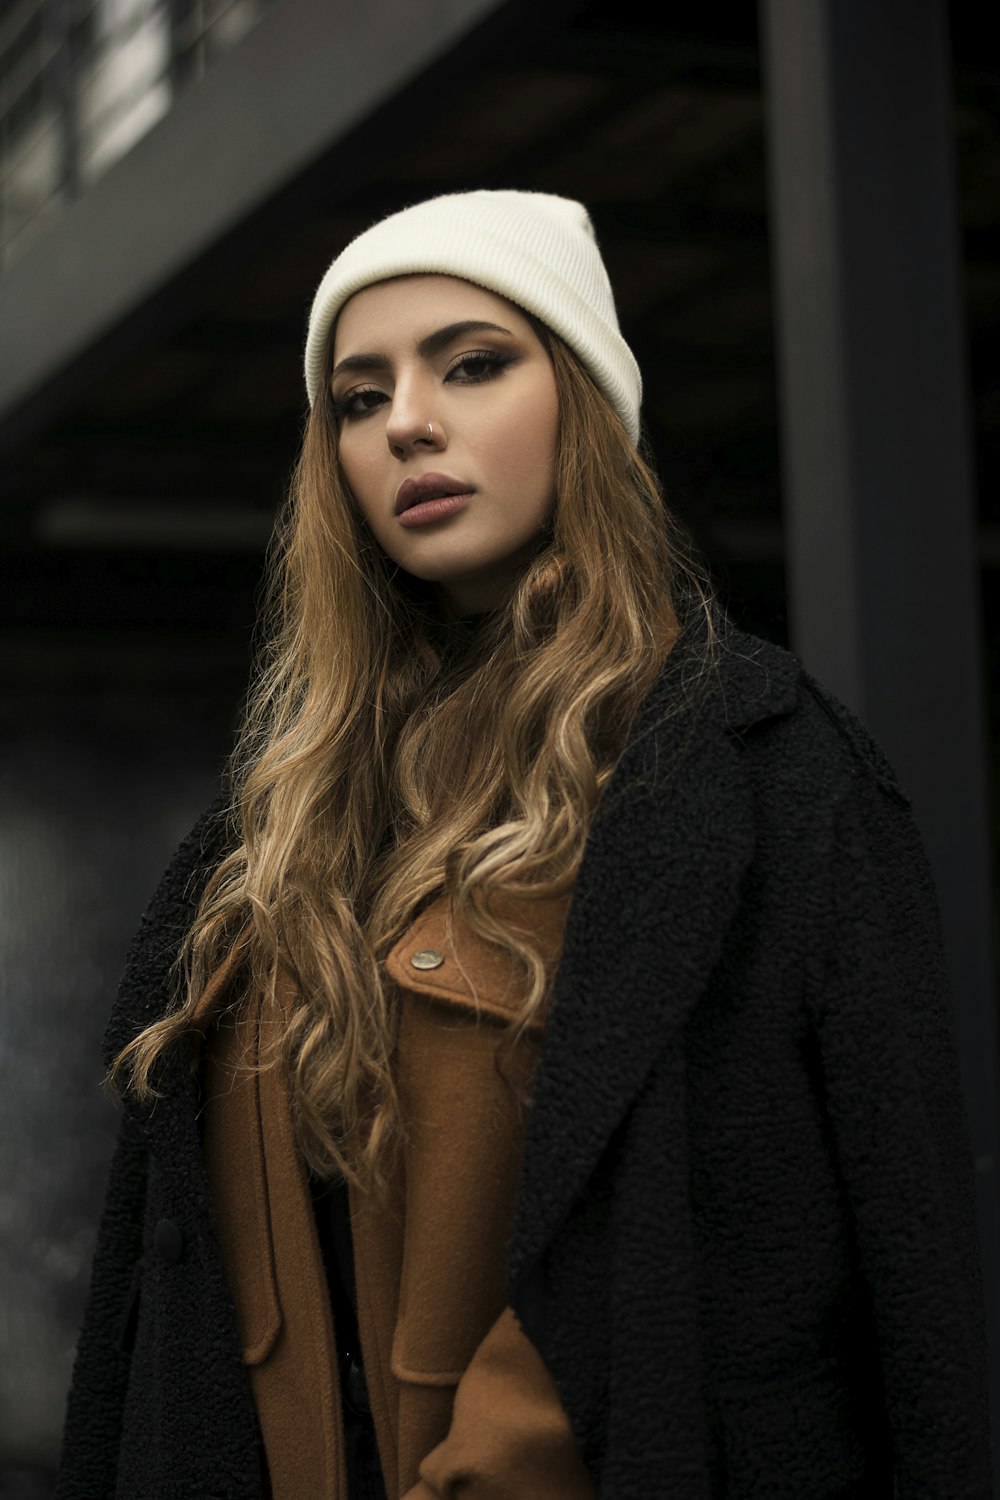 woman in black coat and white knit cap